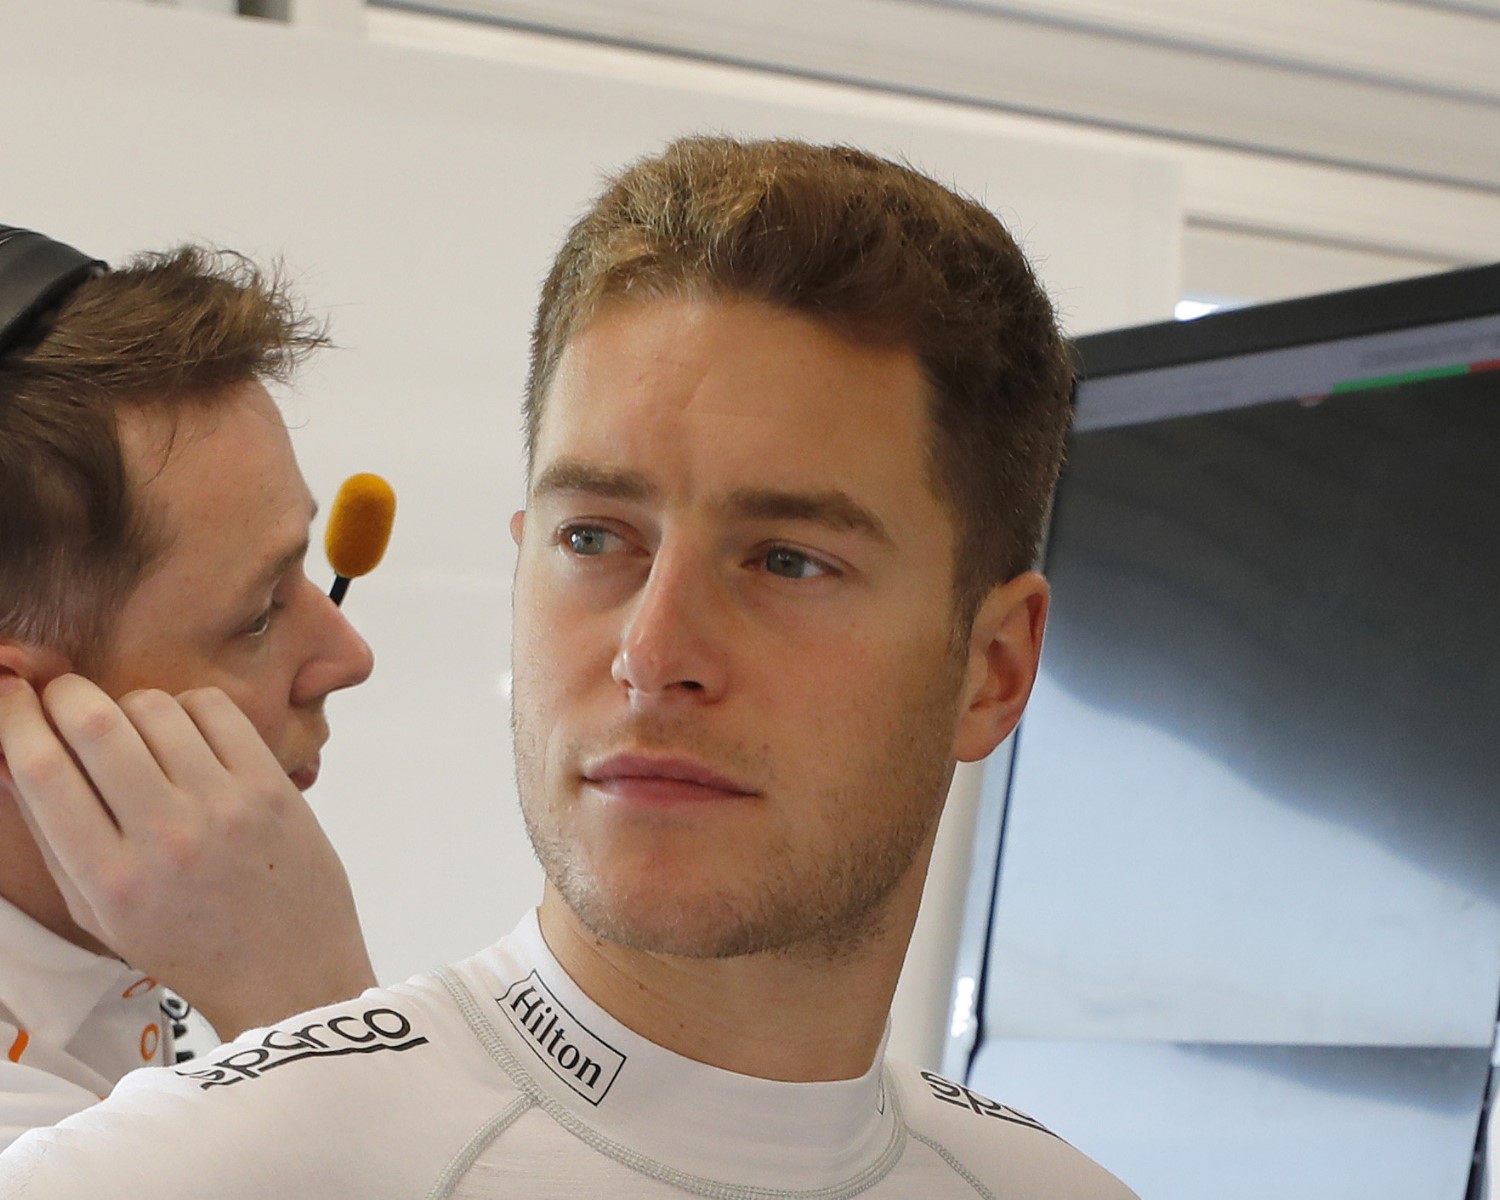 Stoffel Vandoorne too slow for even Toro Rosso, will have to drive IndyCars or Formula E